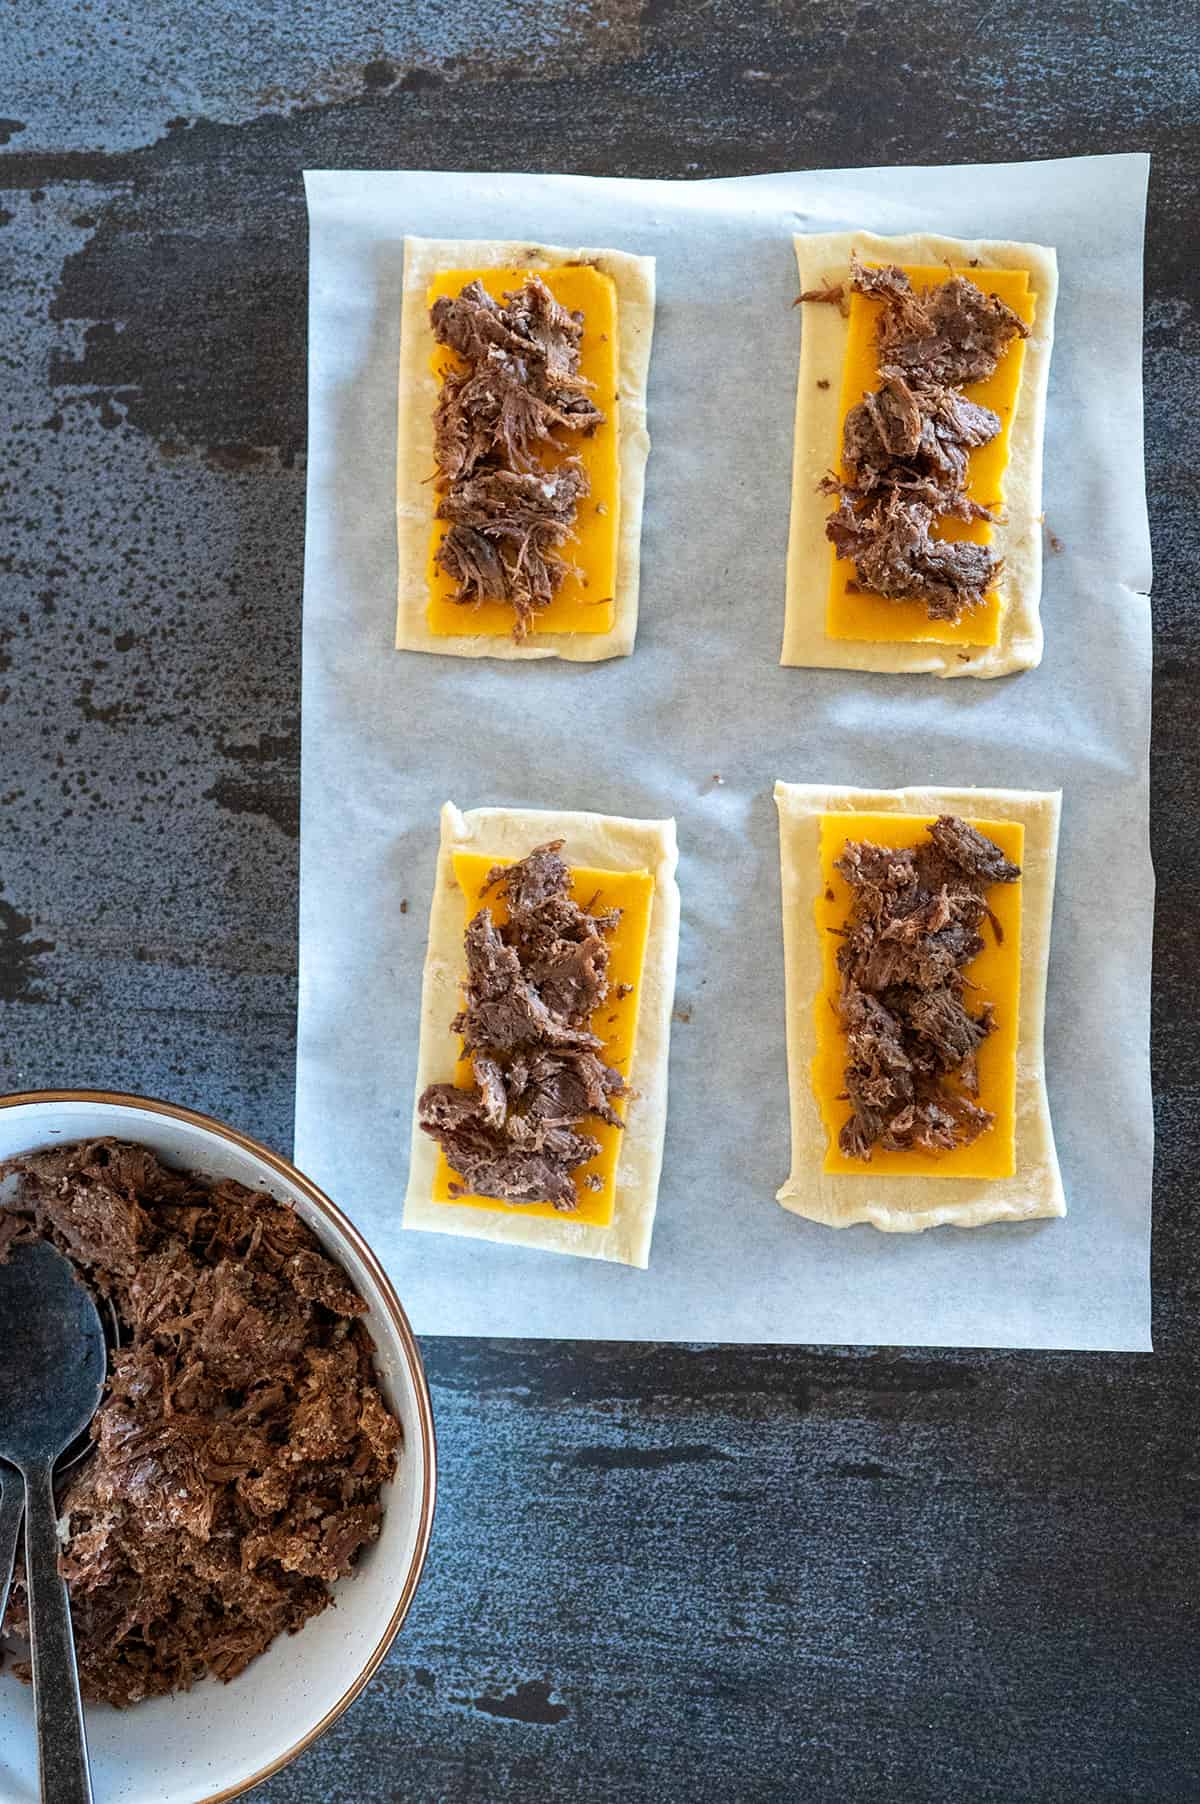 Leftover brisket on cheese.